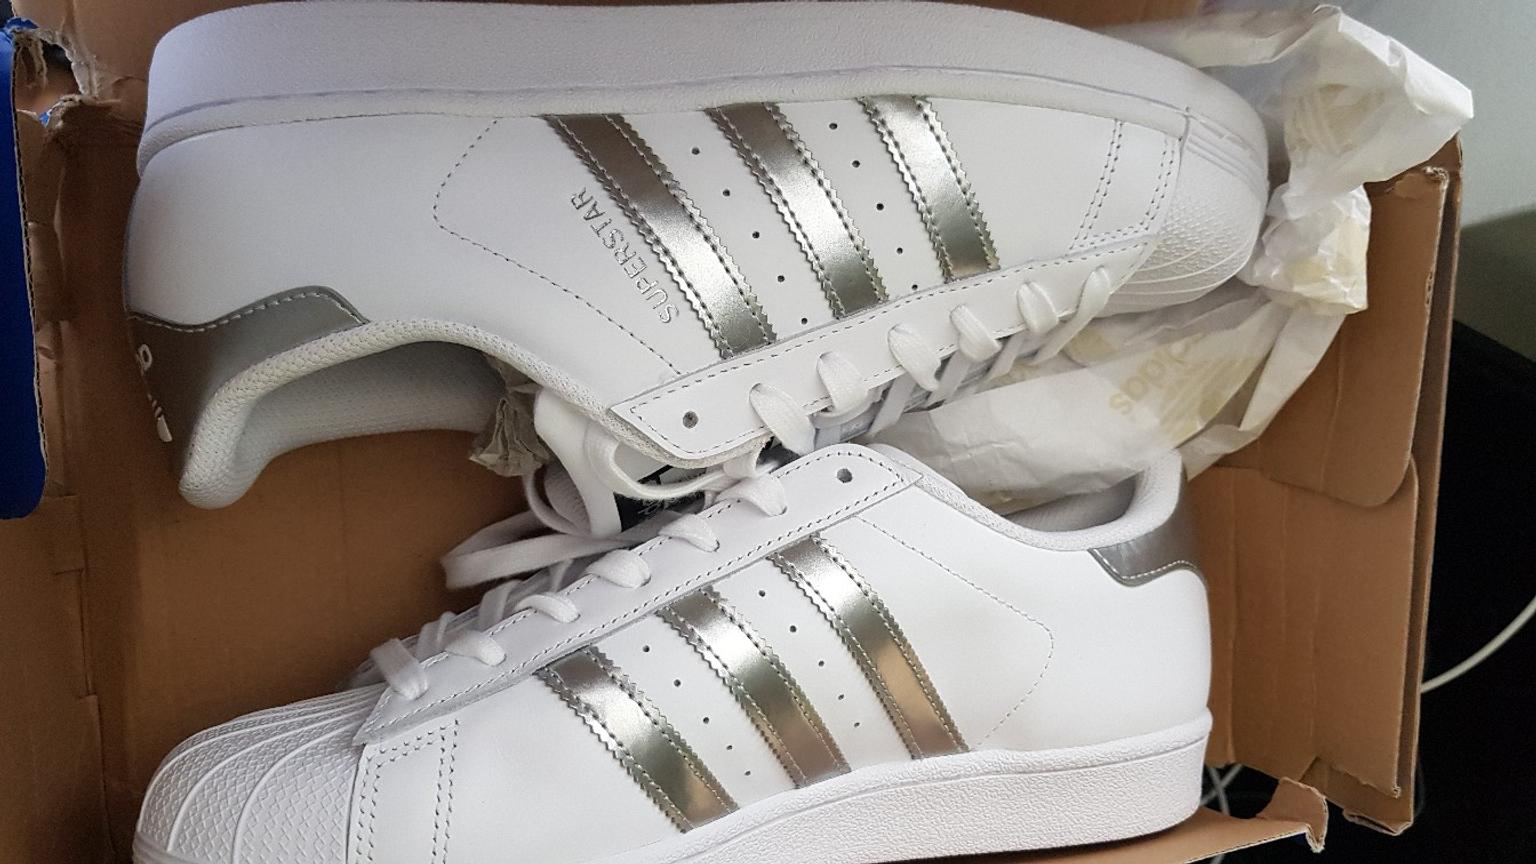 adidas white and silver trainers